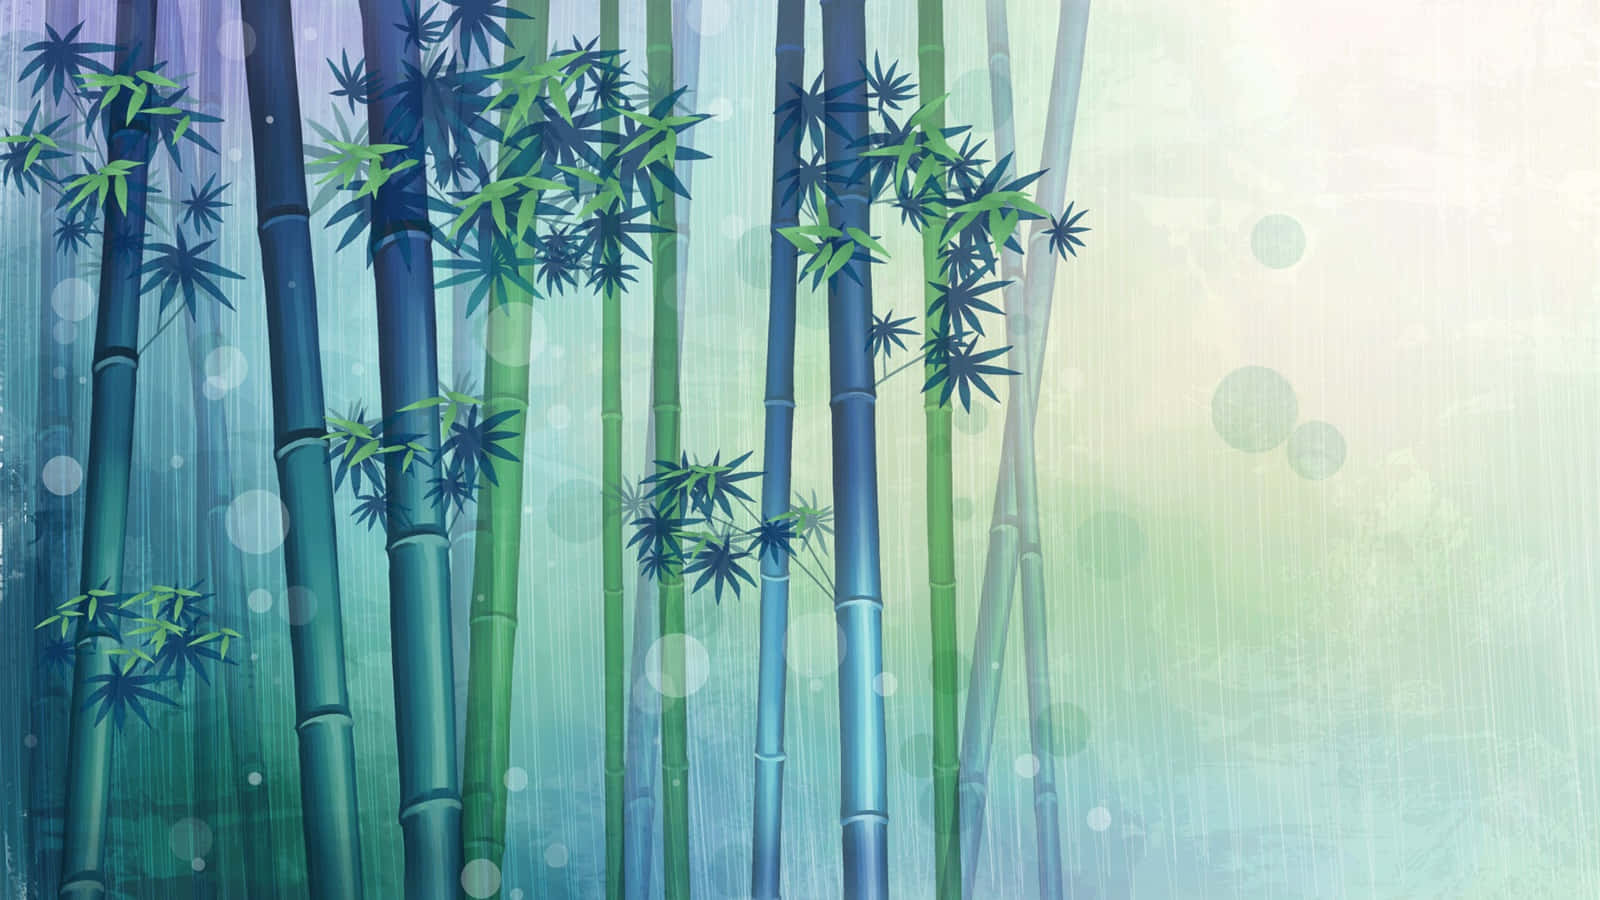 Journey Through The Majestic Bamboo Forest